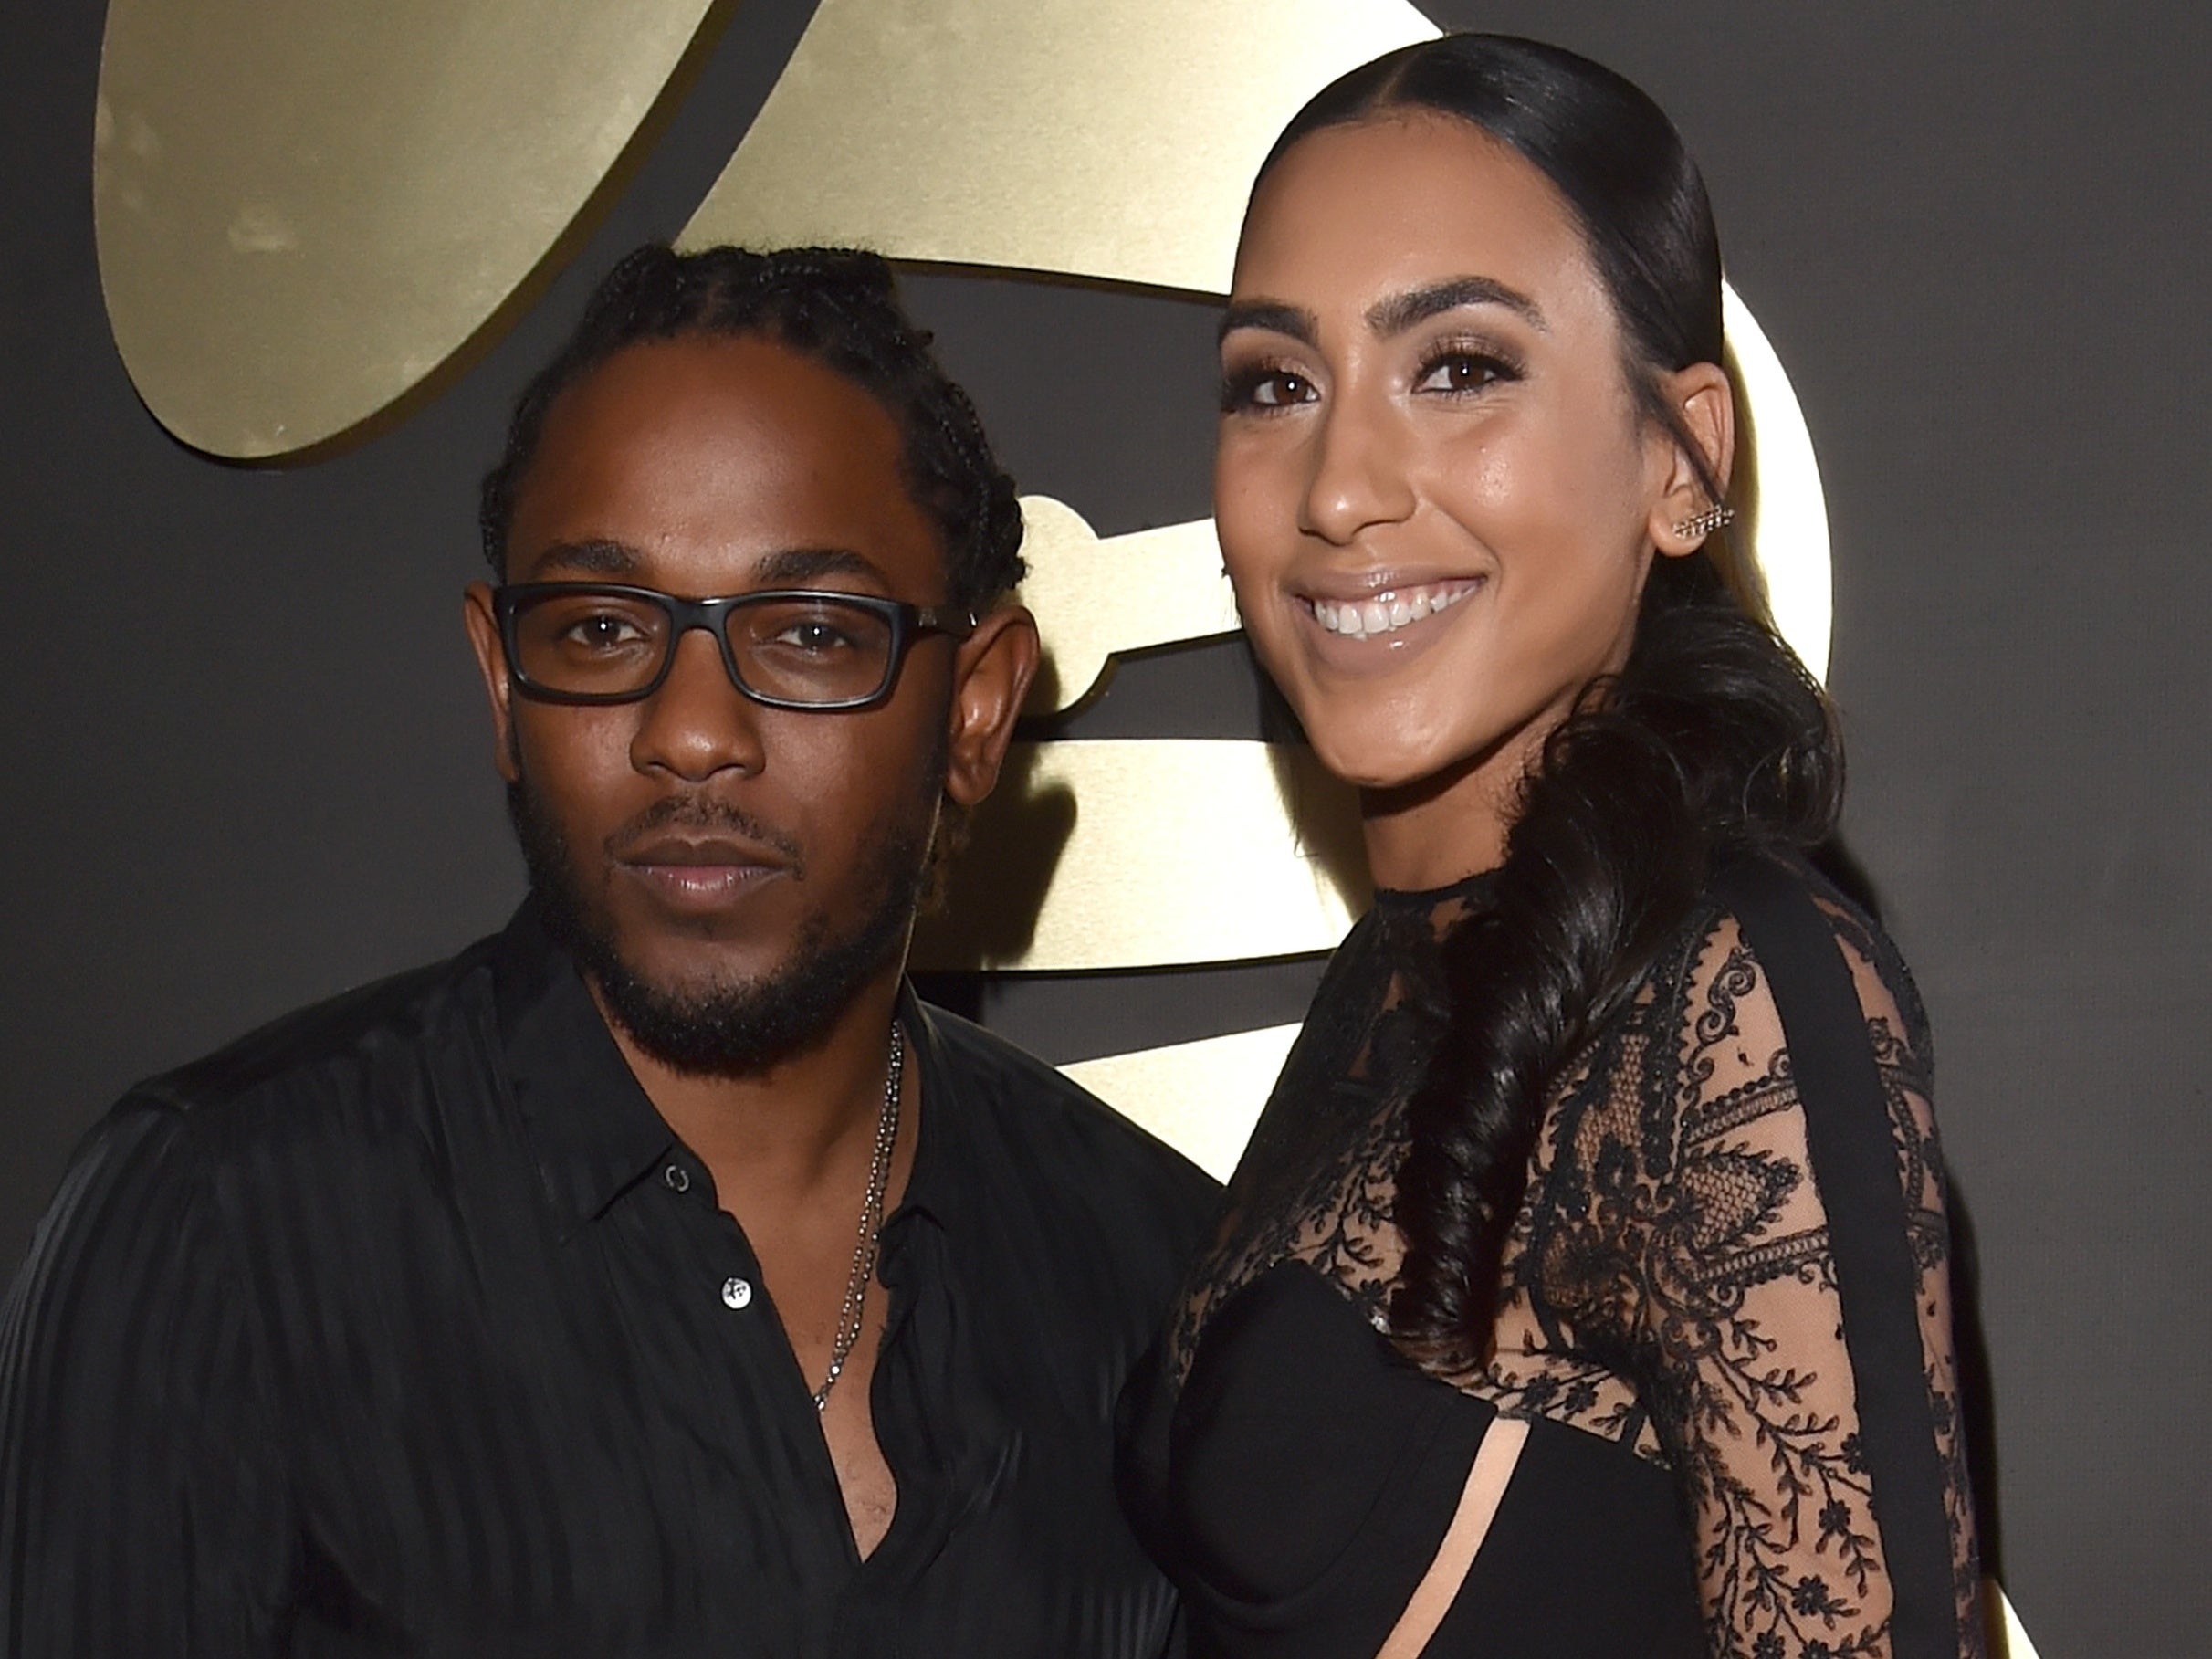 6 Adorable Pictures Of Kendrick Lamar And His Partner Whitney Alford Over The Years